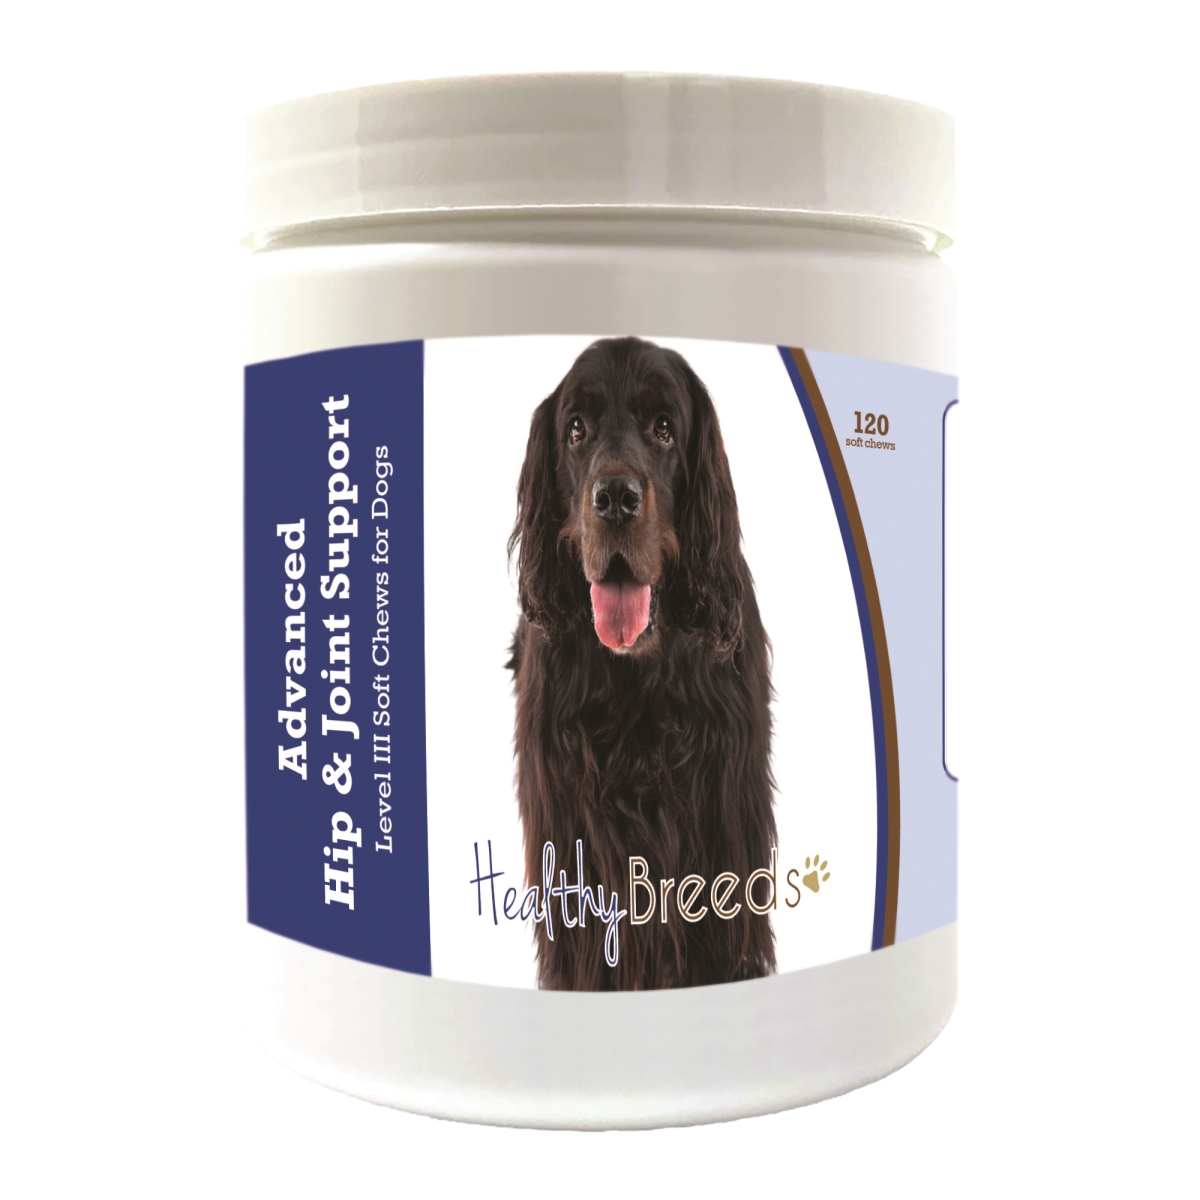 Picture of Healthy Breeds 192959898385 Gordon Setter Advanced Hip & Joint Support Level III Soft Chews for Dogs